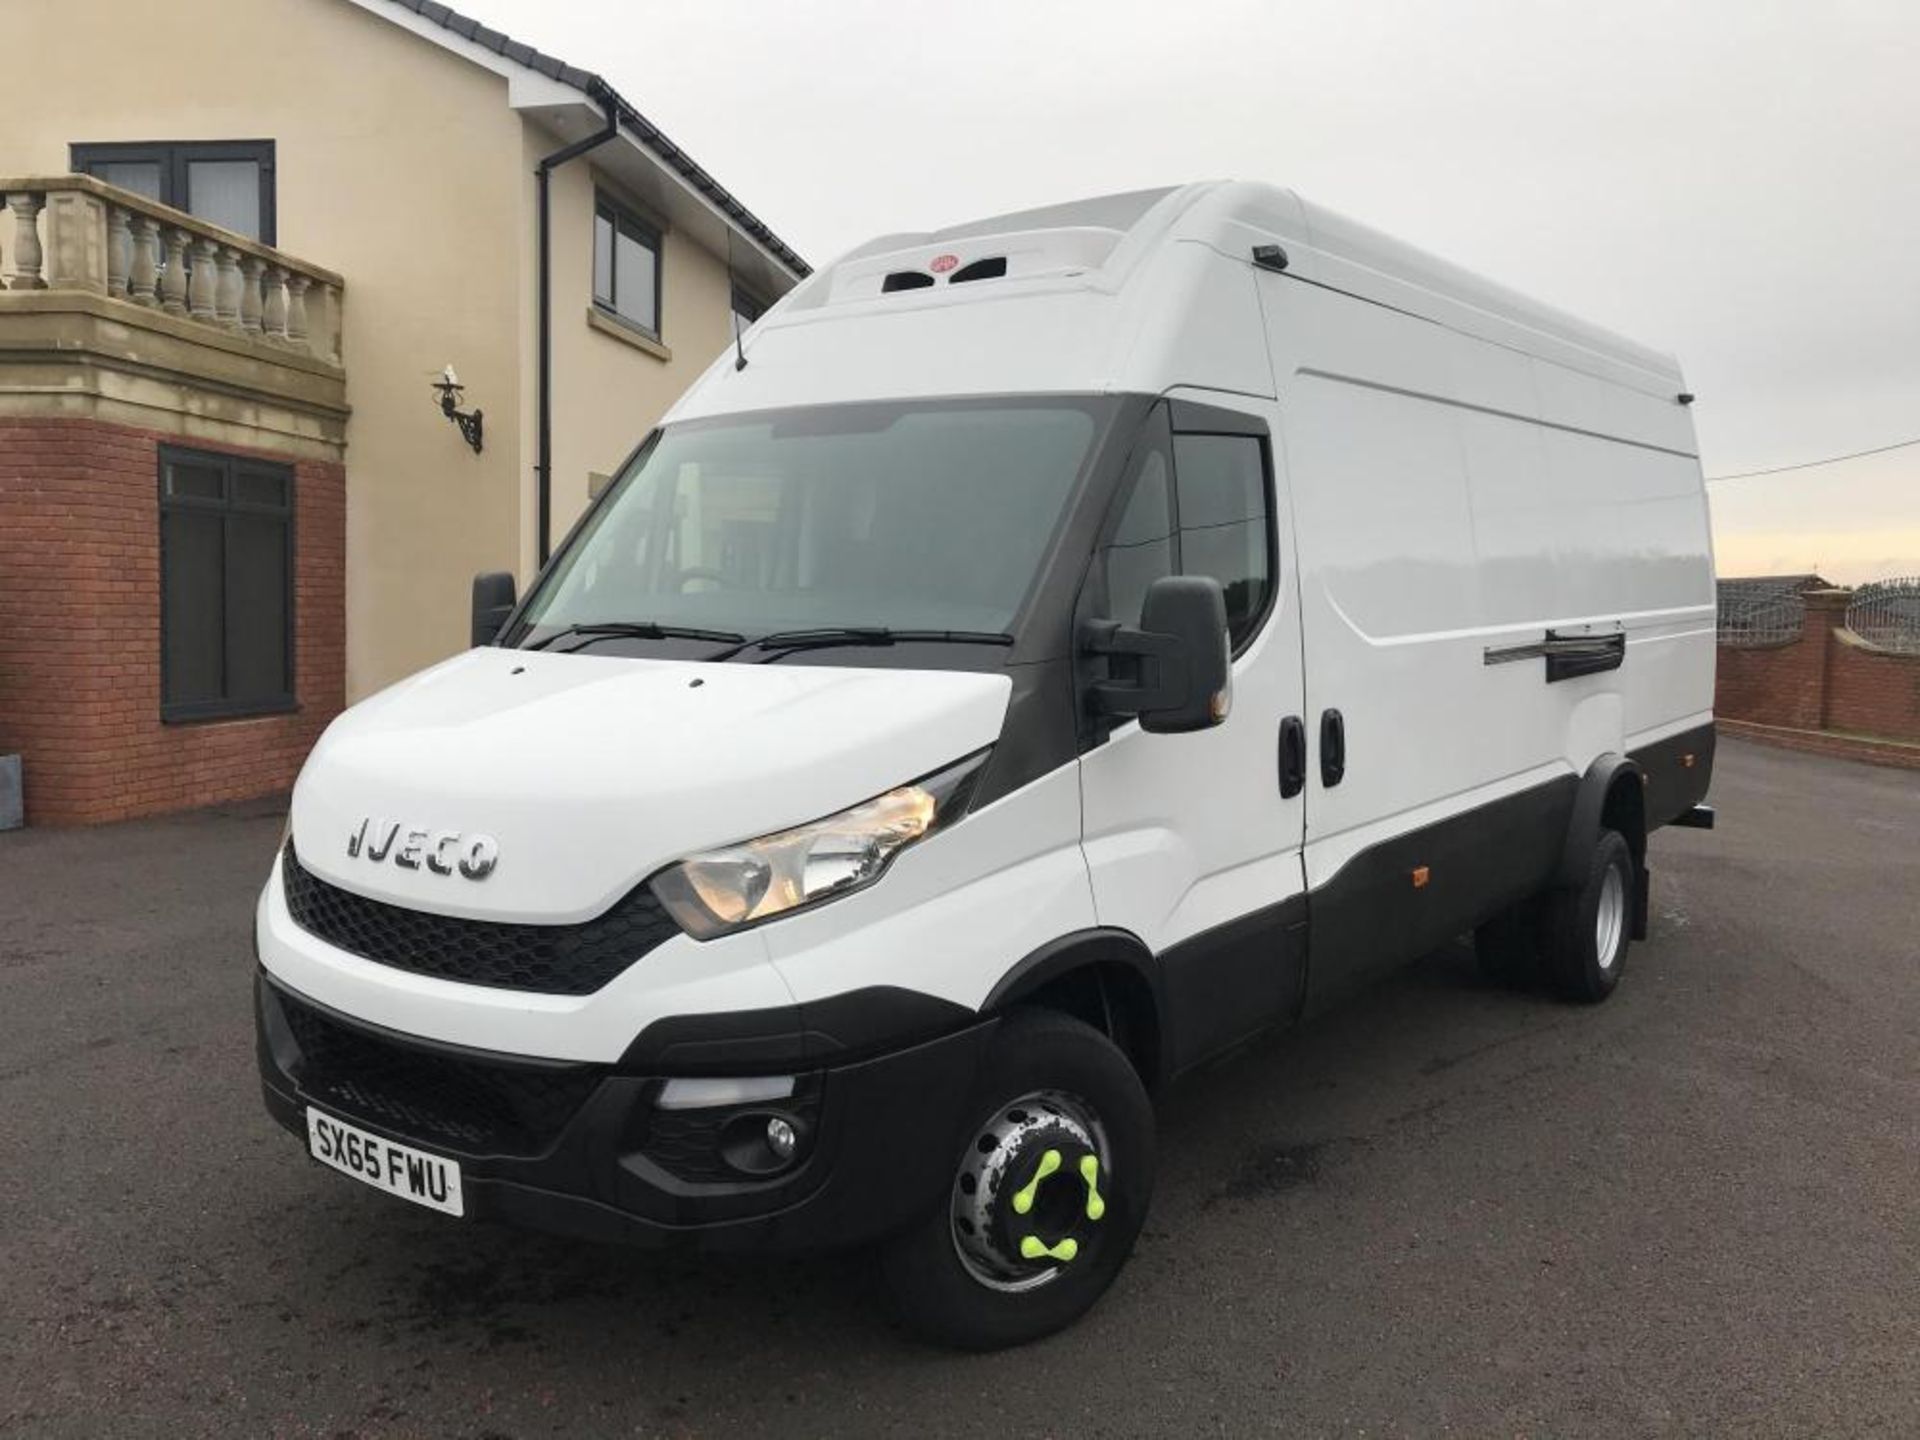 2016/65 REG IVECO DAILY 70C17 7 TON GROSS LWB REFRIGERATED 3.0 DIESEL PANEL VAN, 0 FORMER KEEPERS - Image 2 of 16